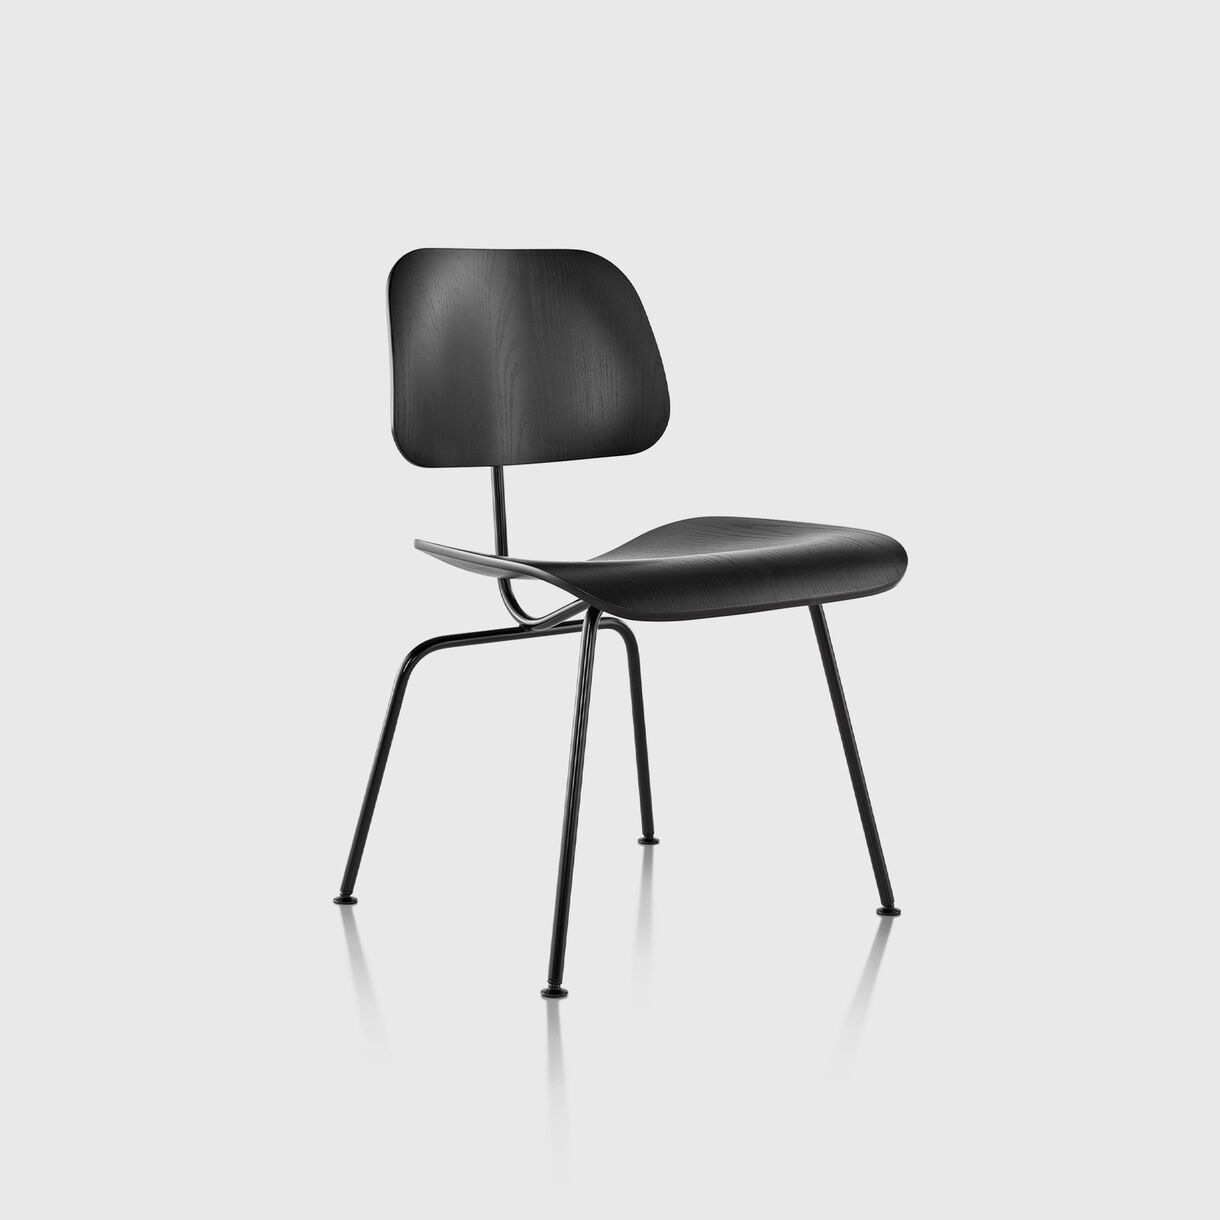 Eames Moulded Plywood Dining Chair, Metal Base, Ebony